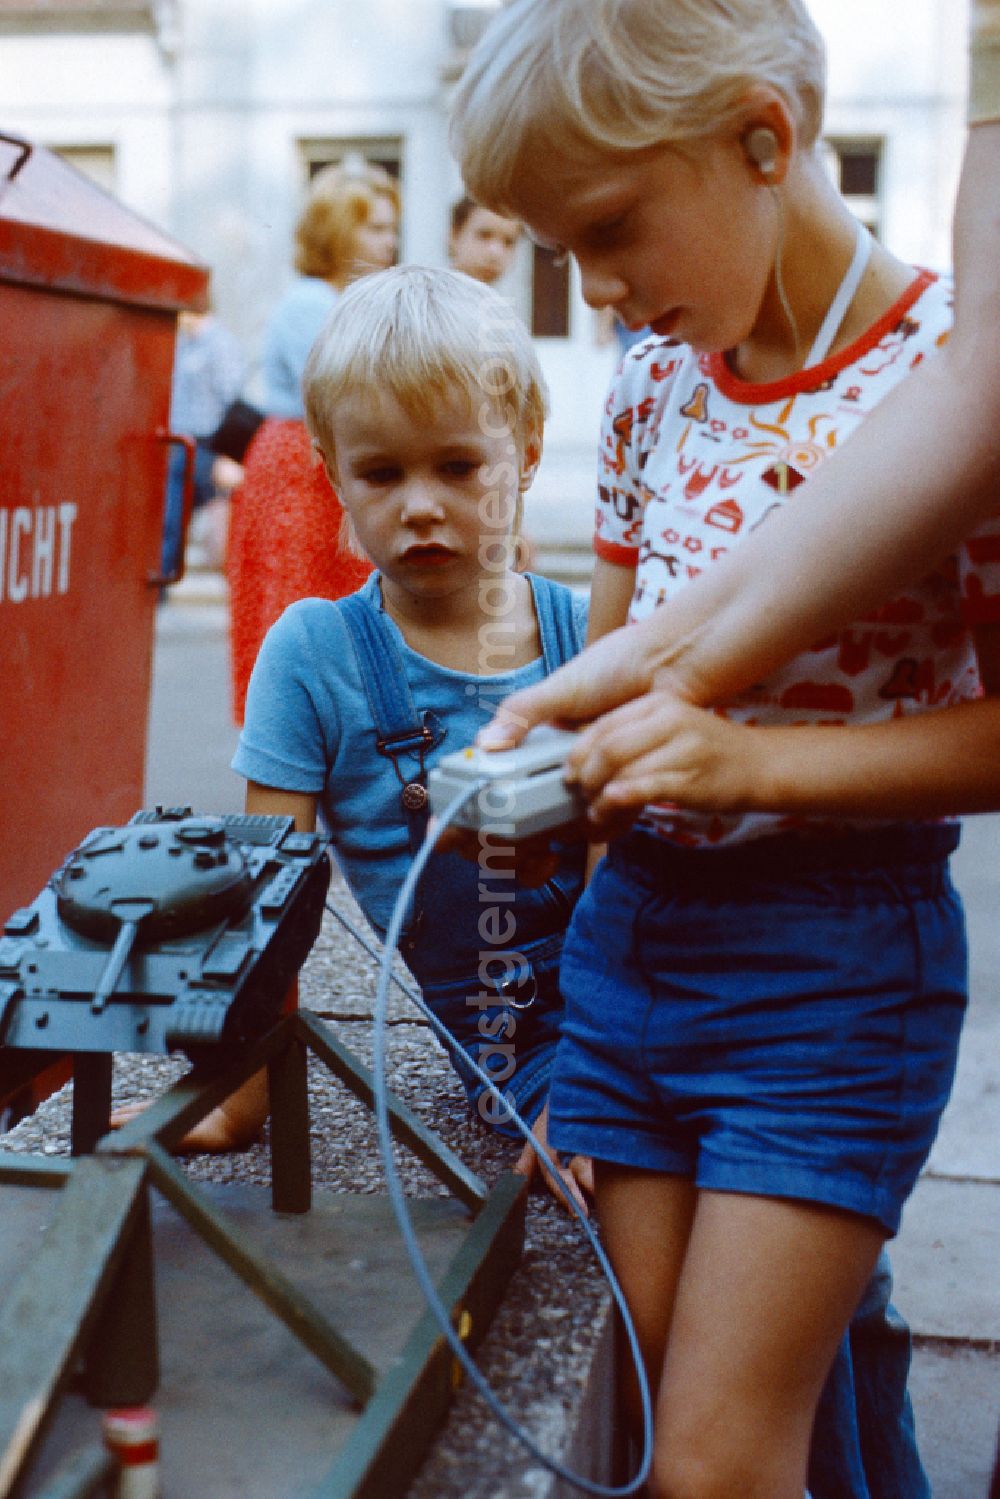 Berlin: Boy plays with a toy tank at the Pankefest in East Berlin on the territory of the former GDR, German Democratic Republic